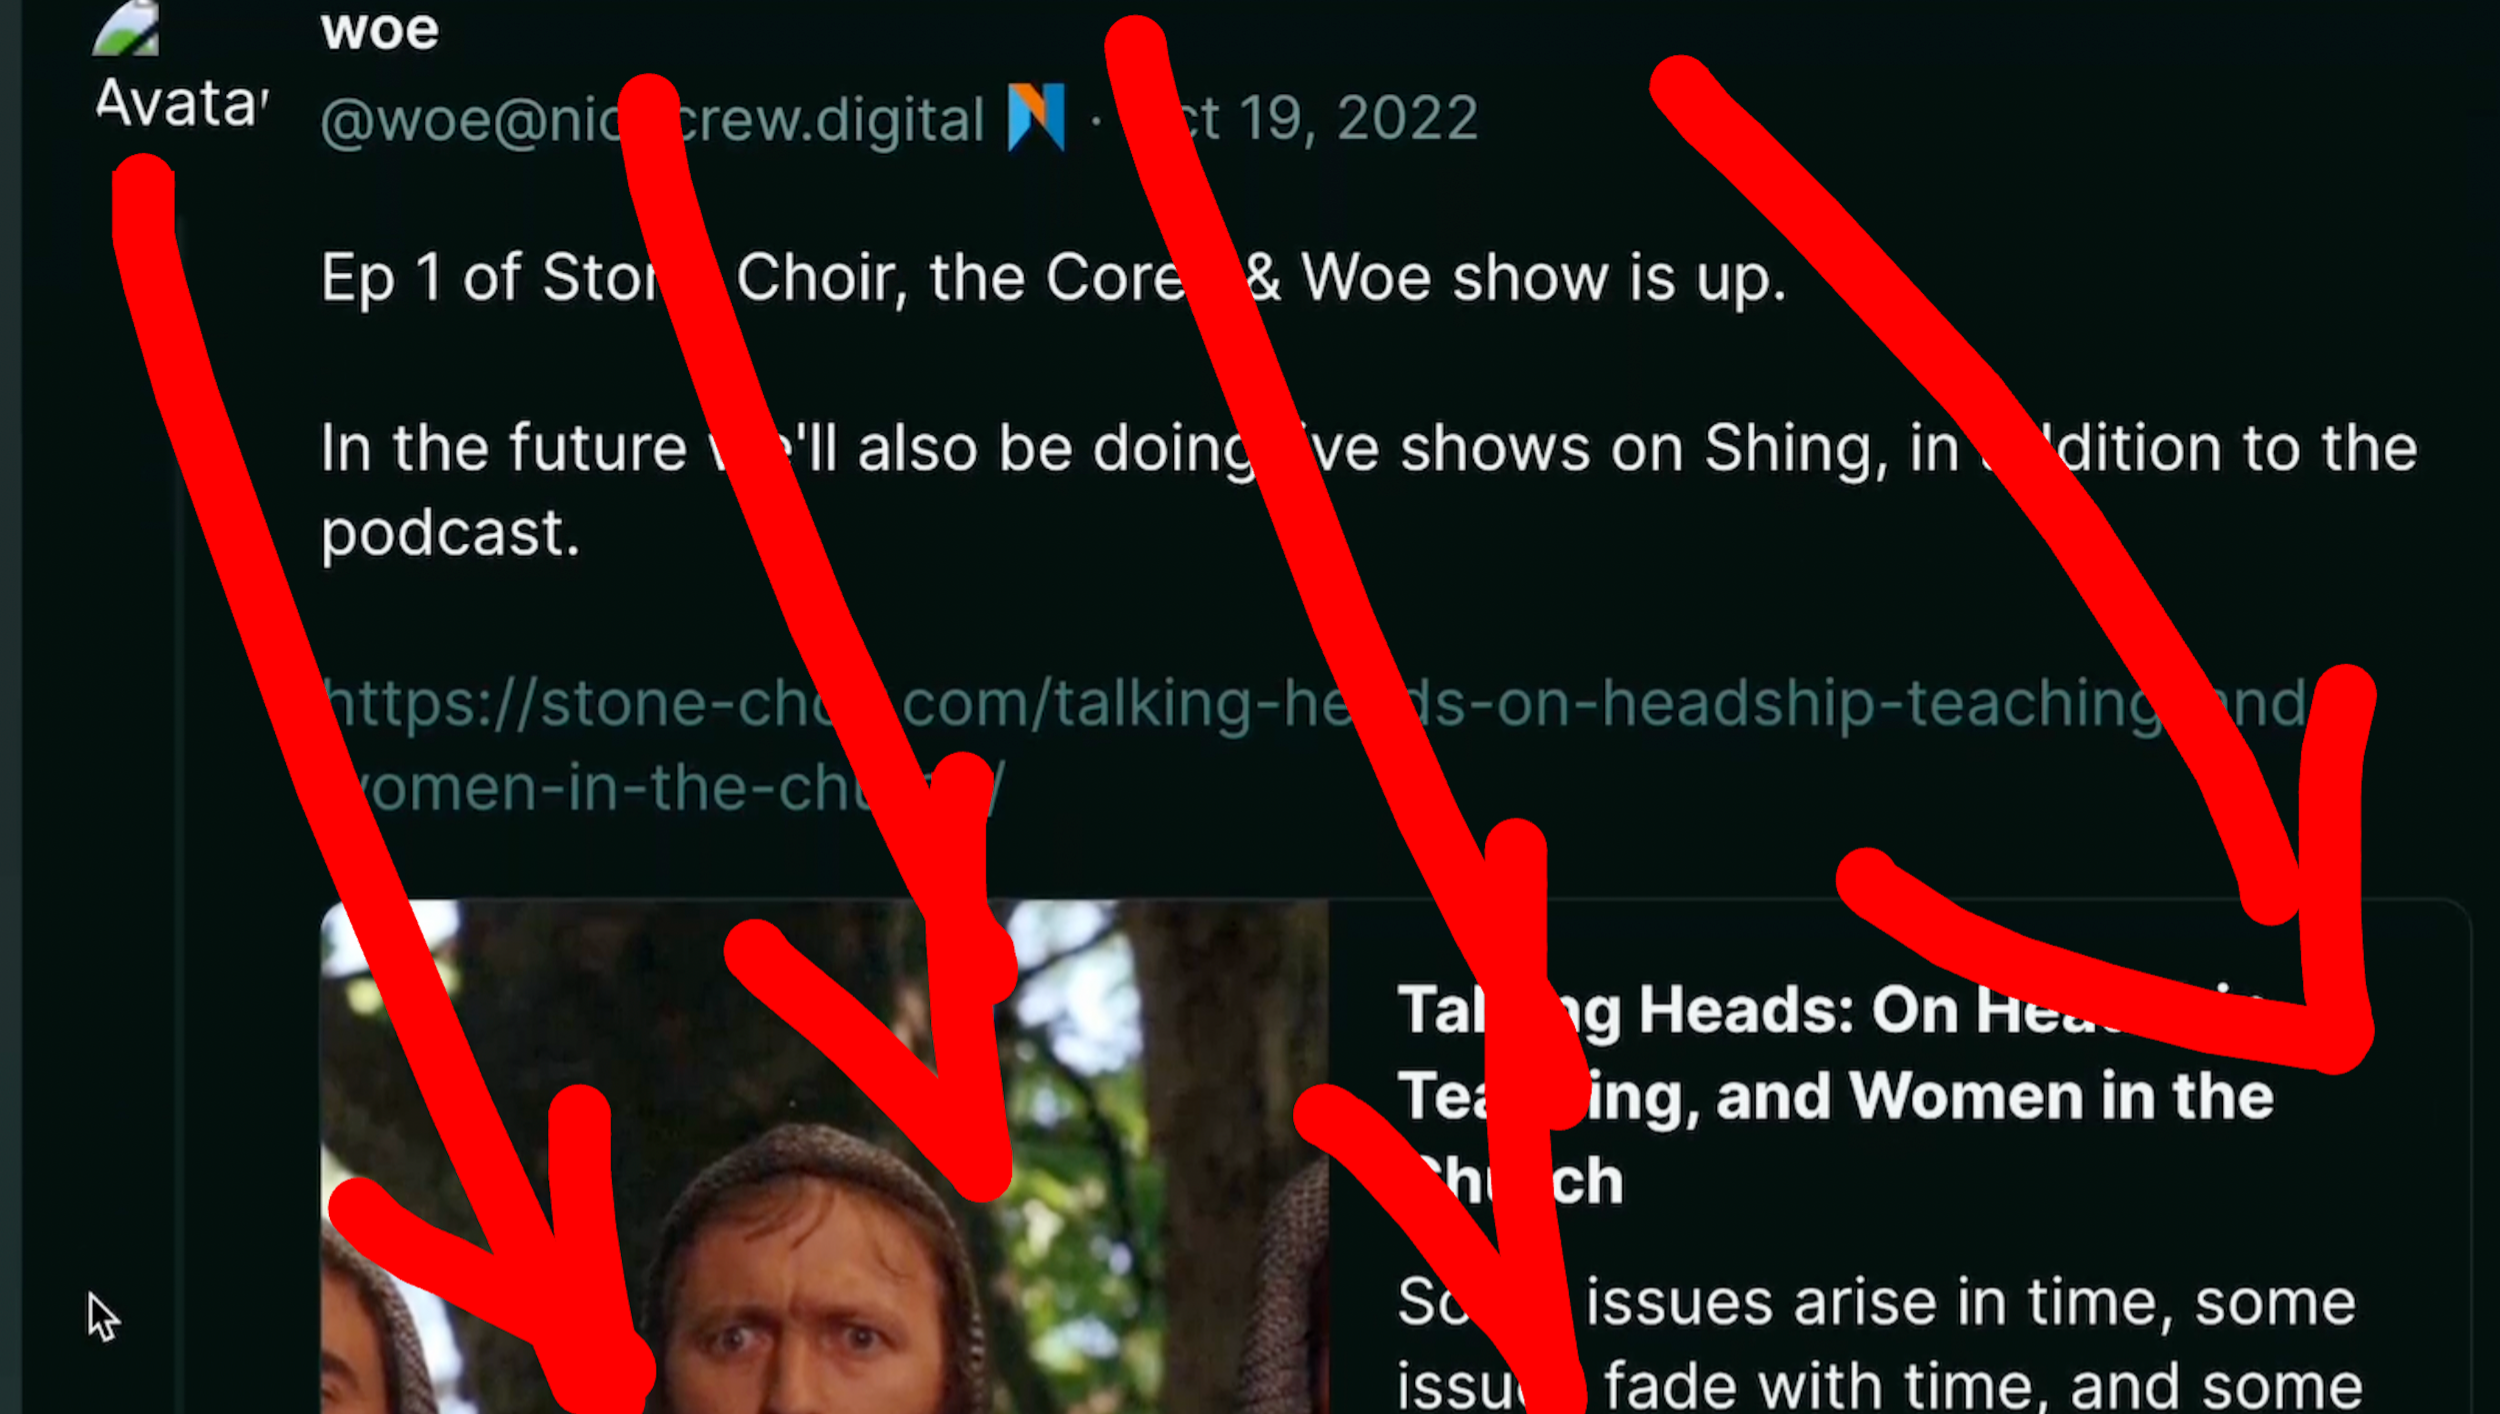 Dumperth on Poast: "Ep 1 of Stone Choir, the Corey and Woe show is up. In the future, we'll also be doing live shows on Shing, in addition to the podcast.:" Links to the first episode